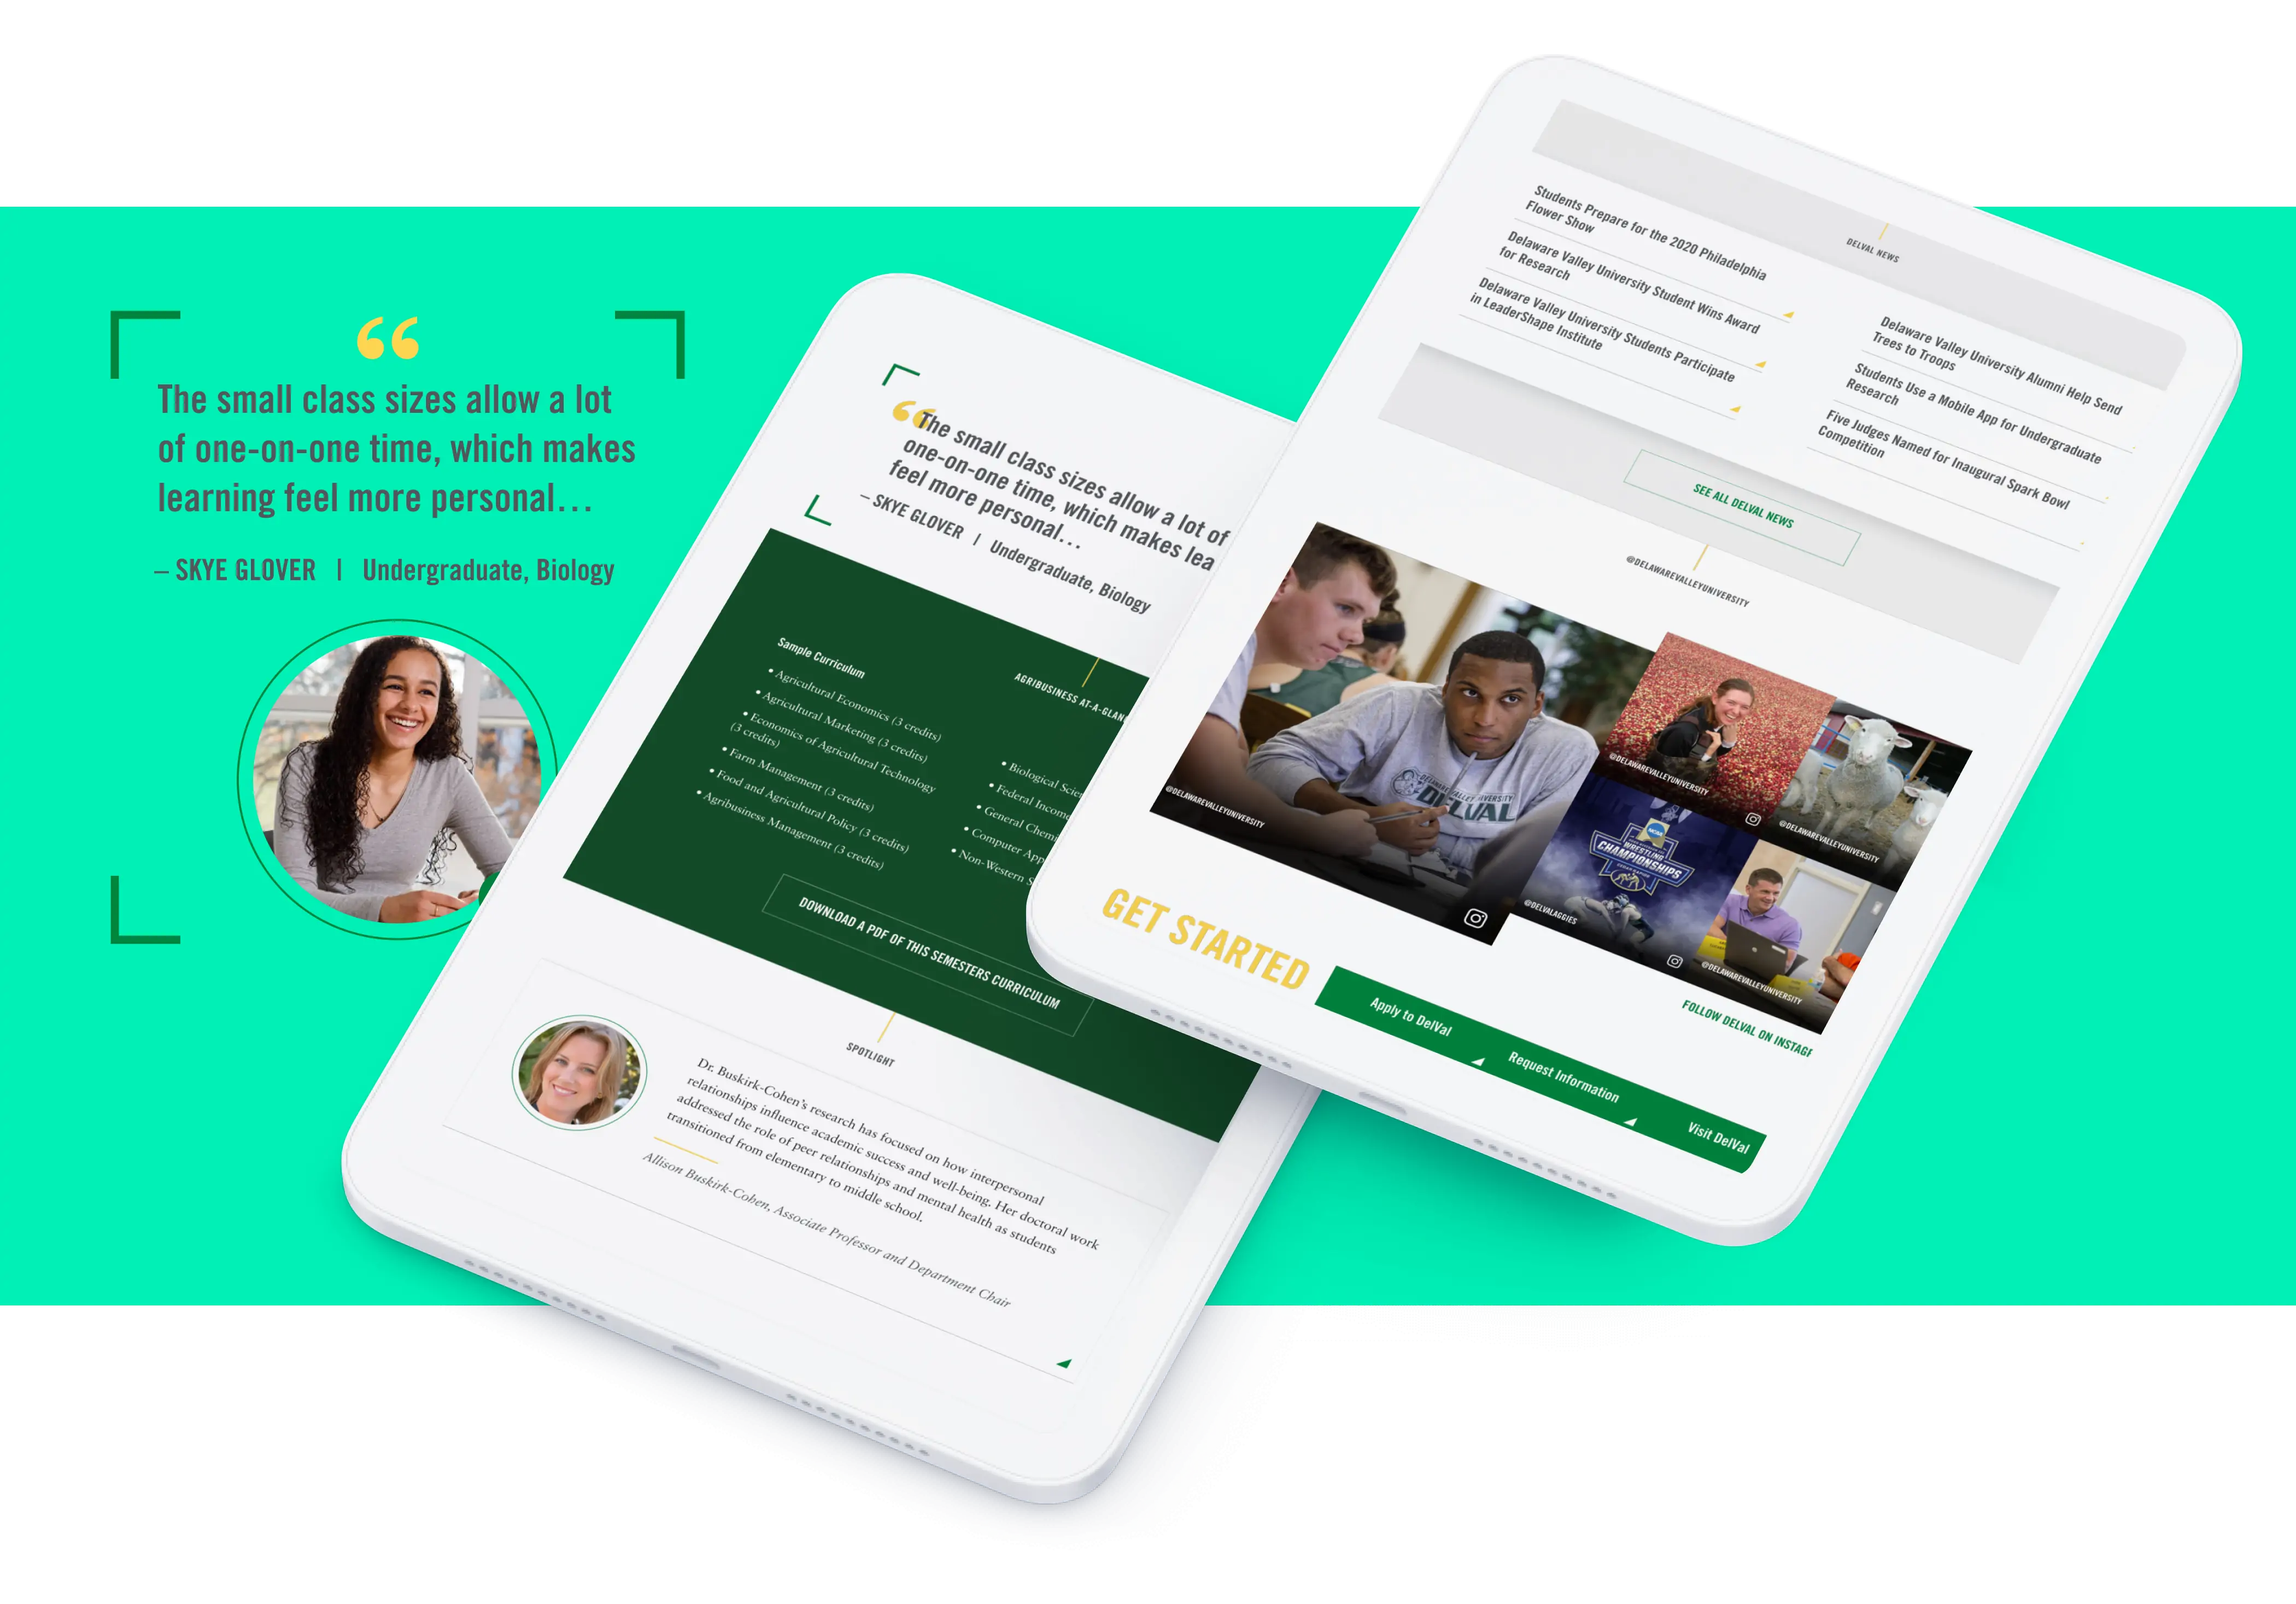 Two tablets show web pages featuring Delaware Valley University's program information, and a student quote describing the benefits of small class sizes